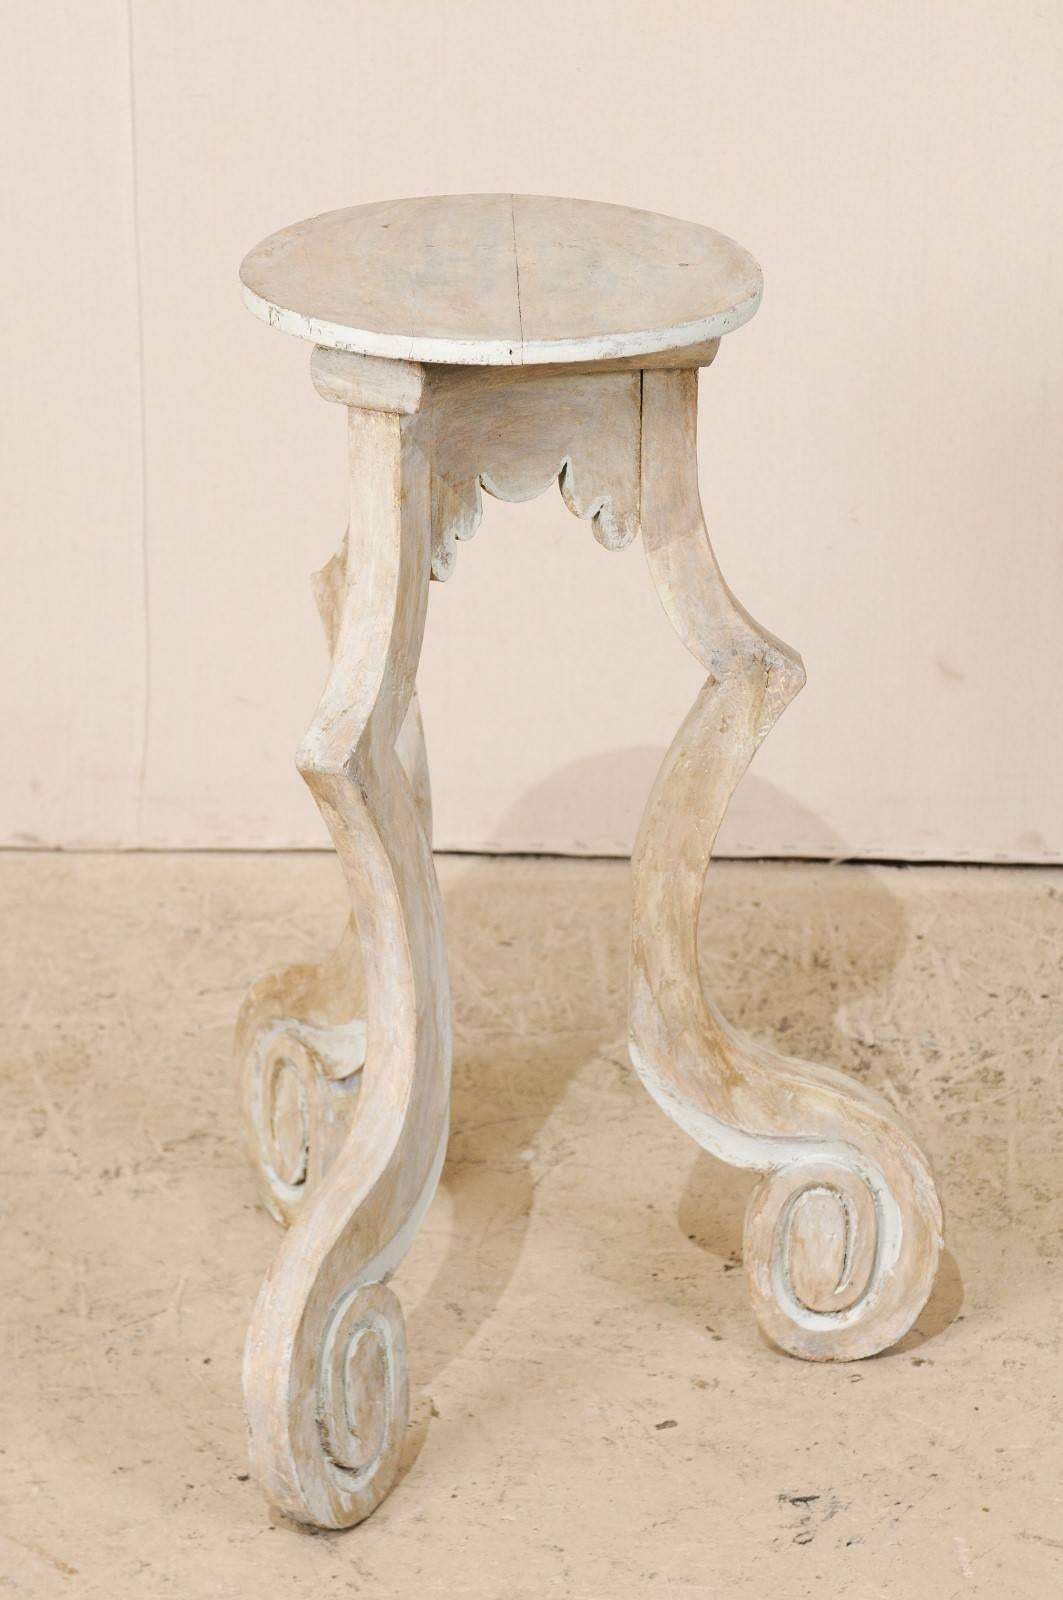 20th Century Spanish Painted Wood Table Stand or Side Table in Light Beige Color, Three Legs